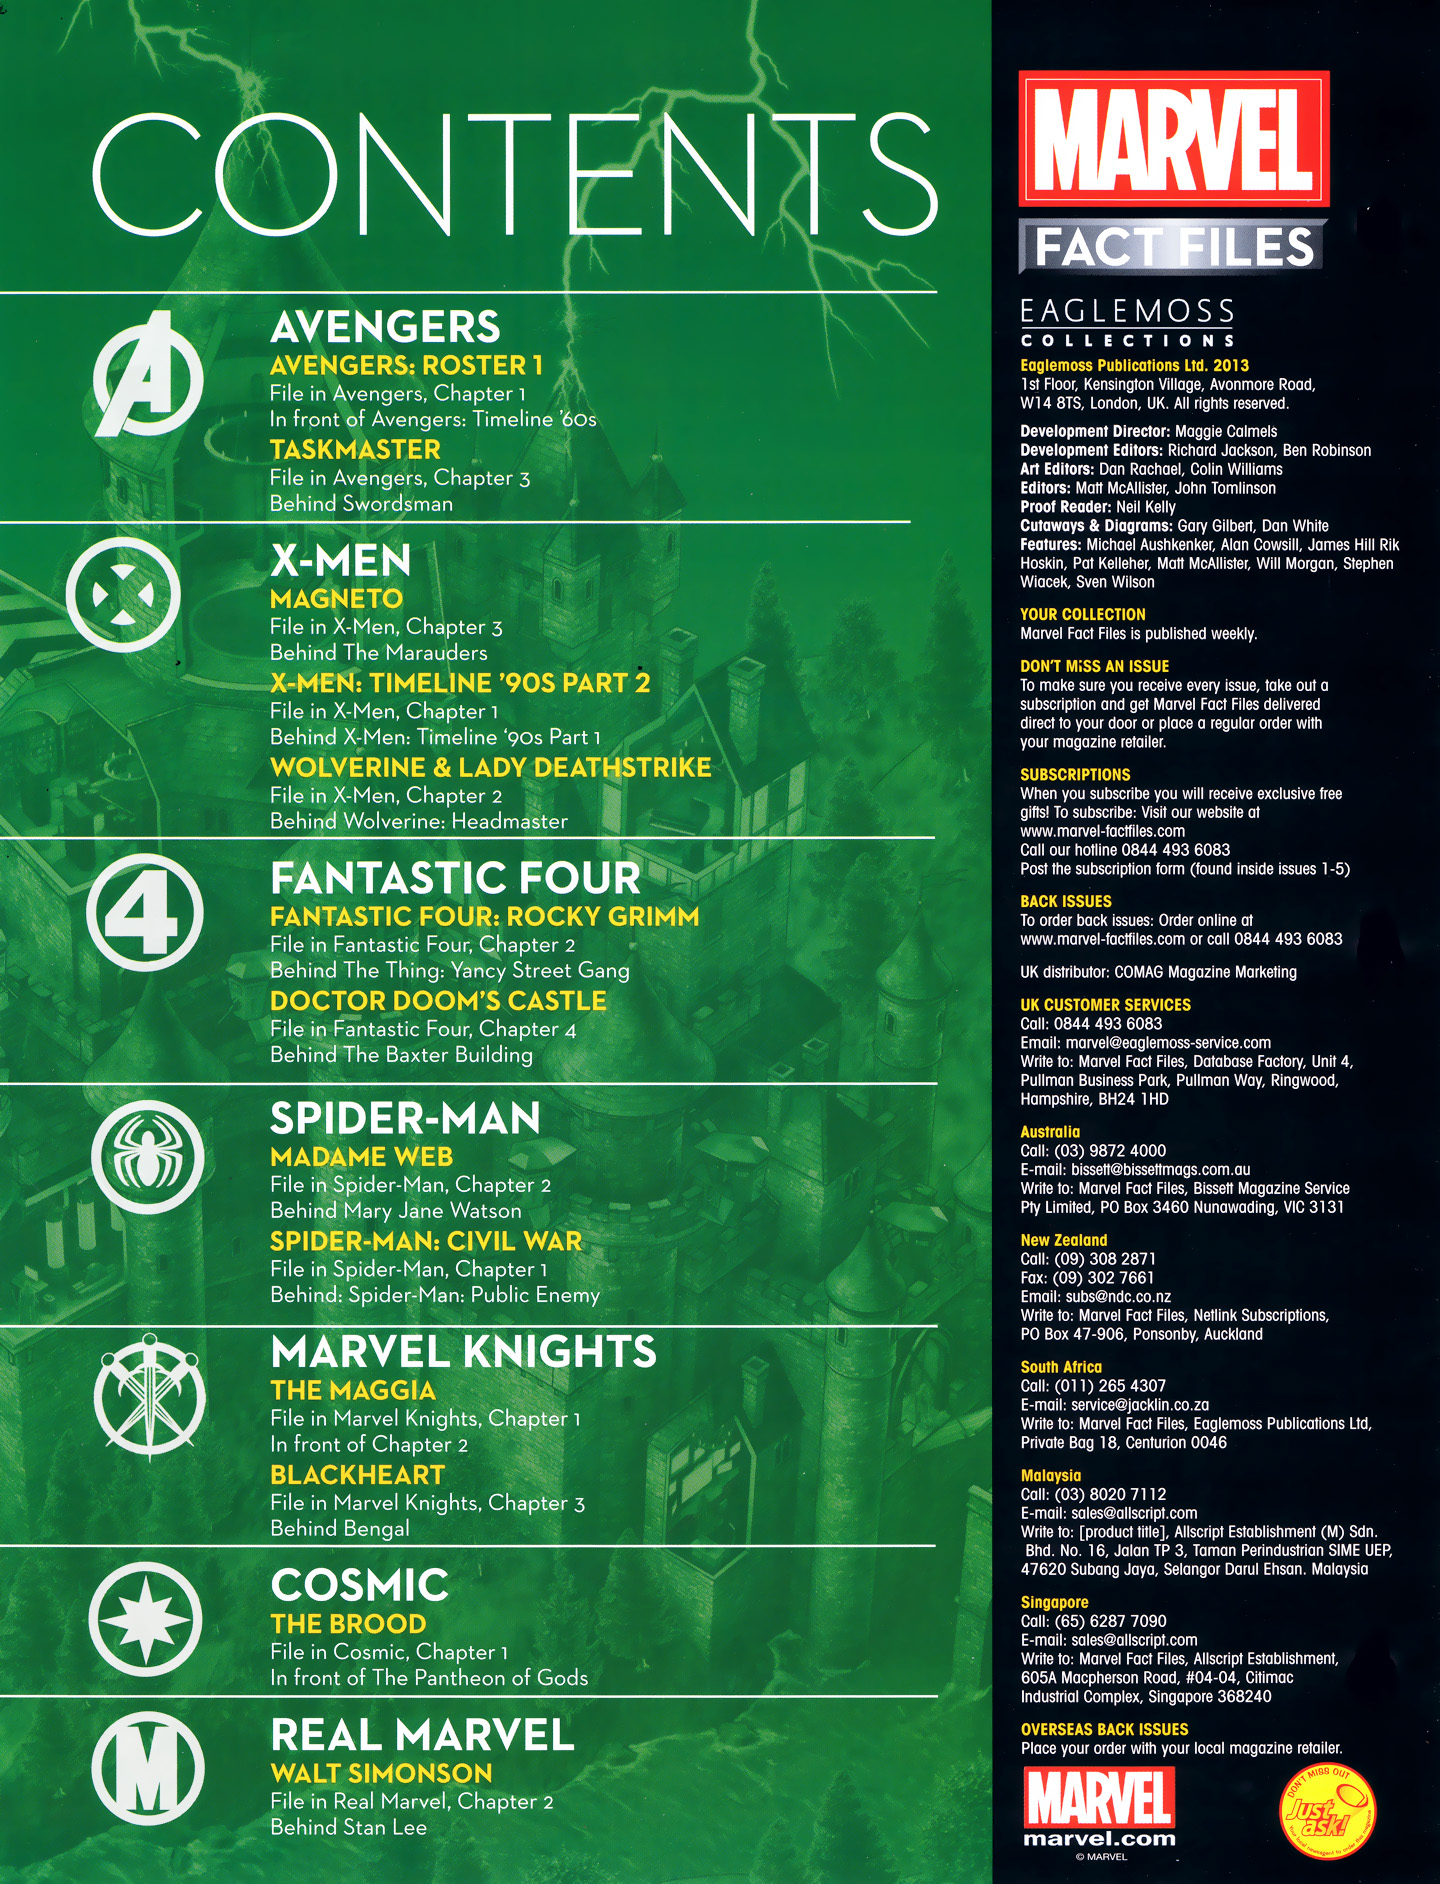 Read online Marvel Fact Files comic -  Issue #28 - 3